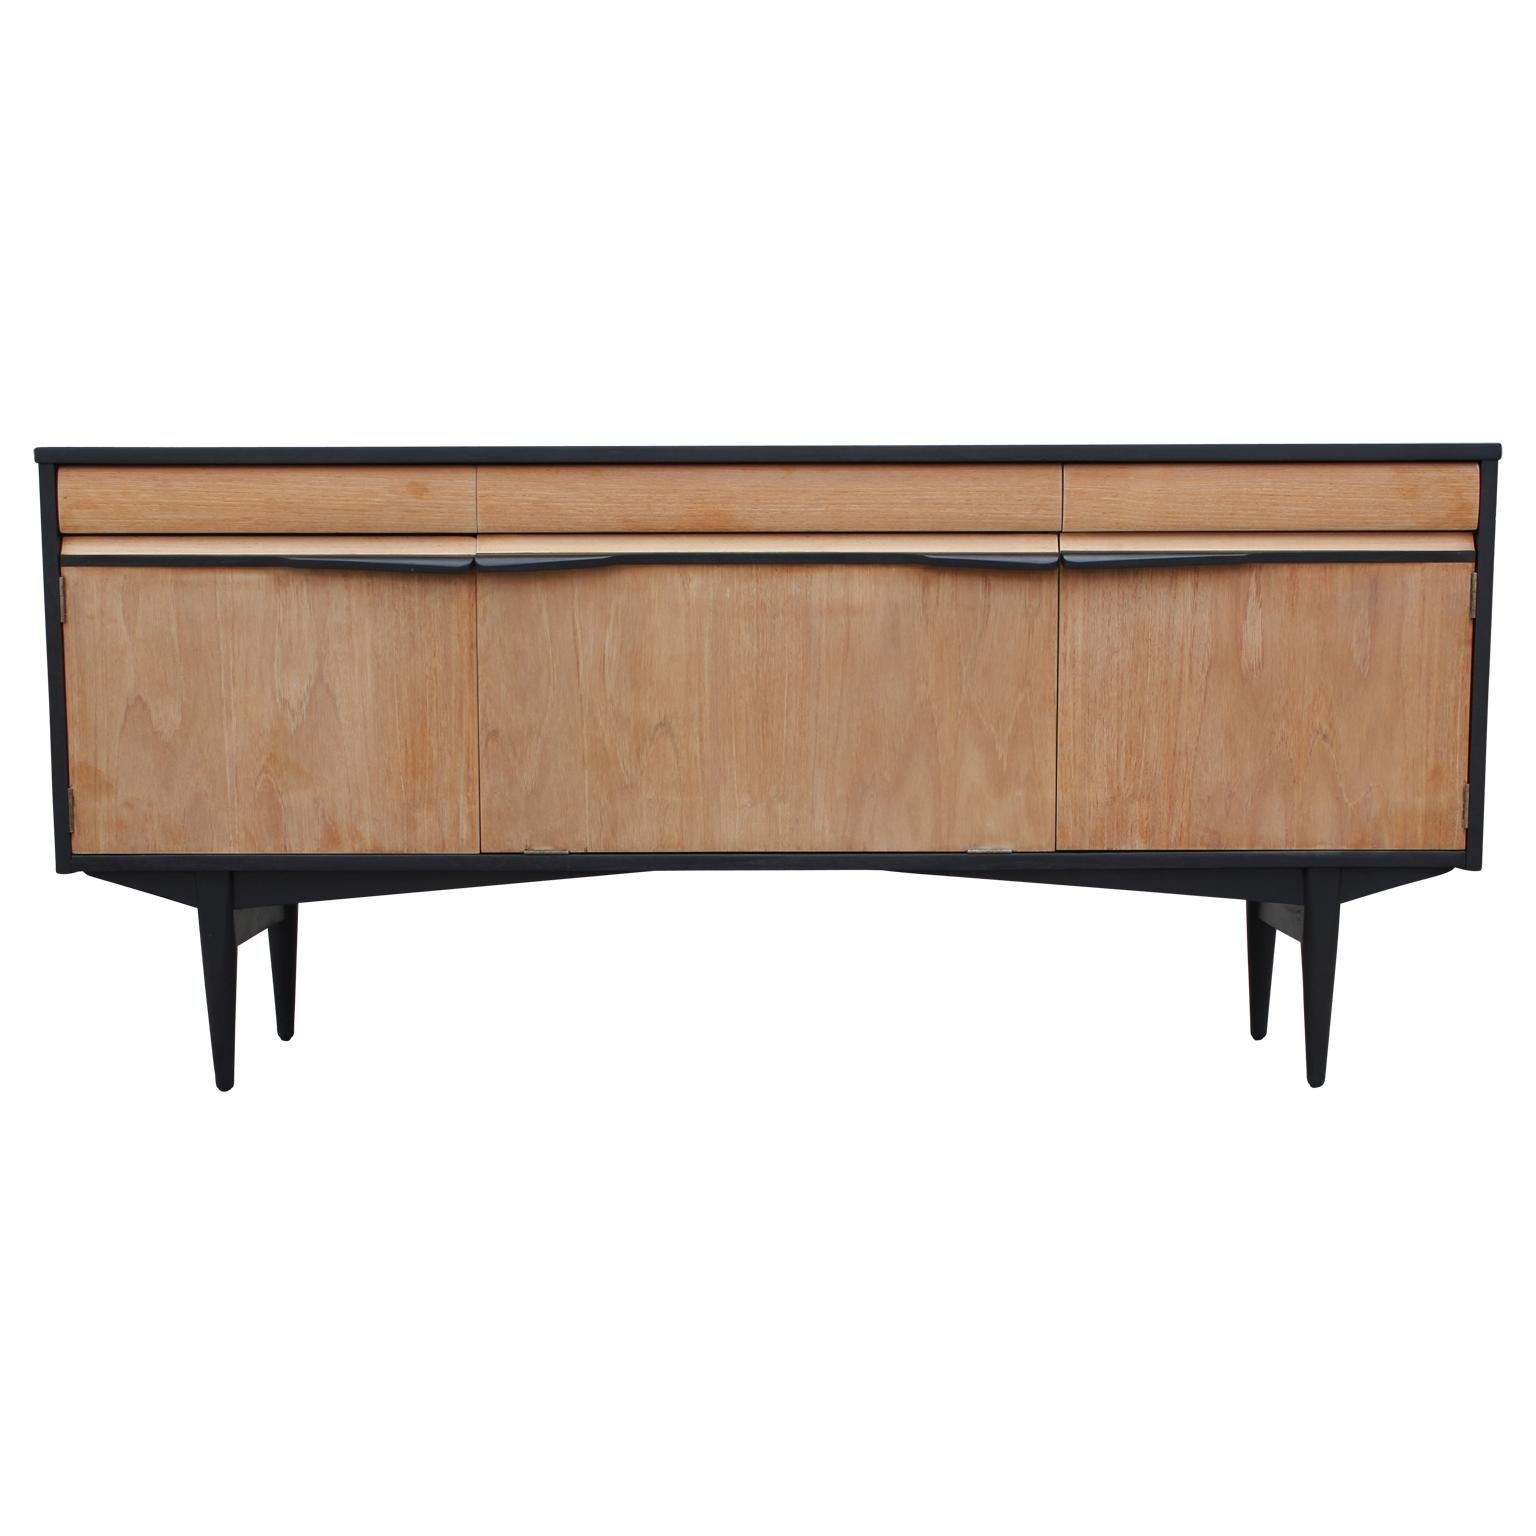 Mid-Century Modern Two-Tone Clean Lined Credenza or Sideboard with Three Drawers